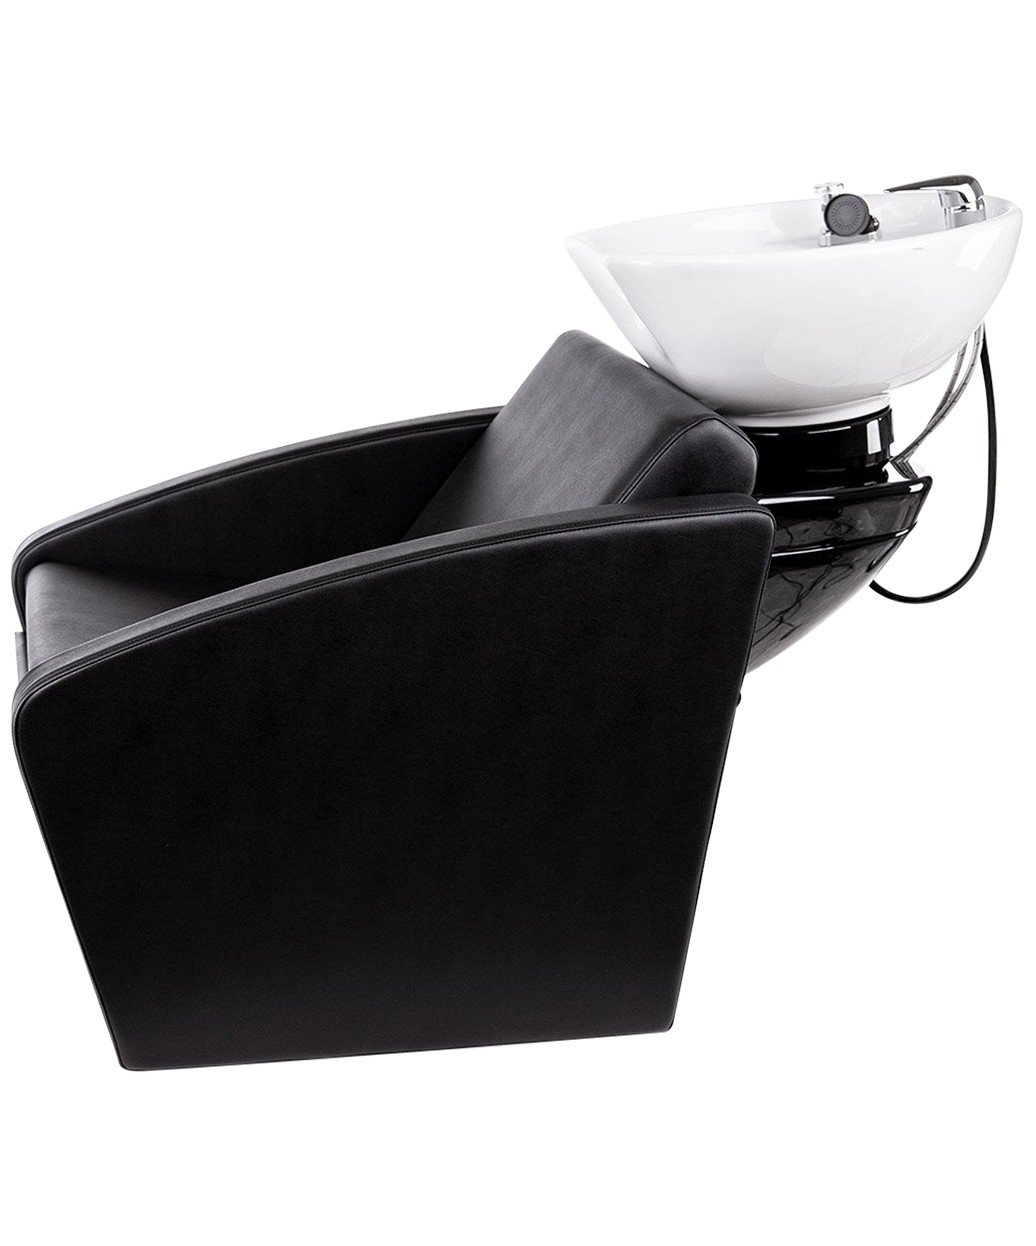 Collins 2850 Veeco Tranquility Electric Shampoo Unit